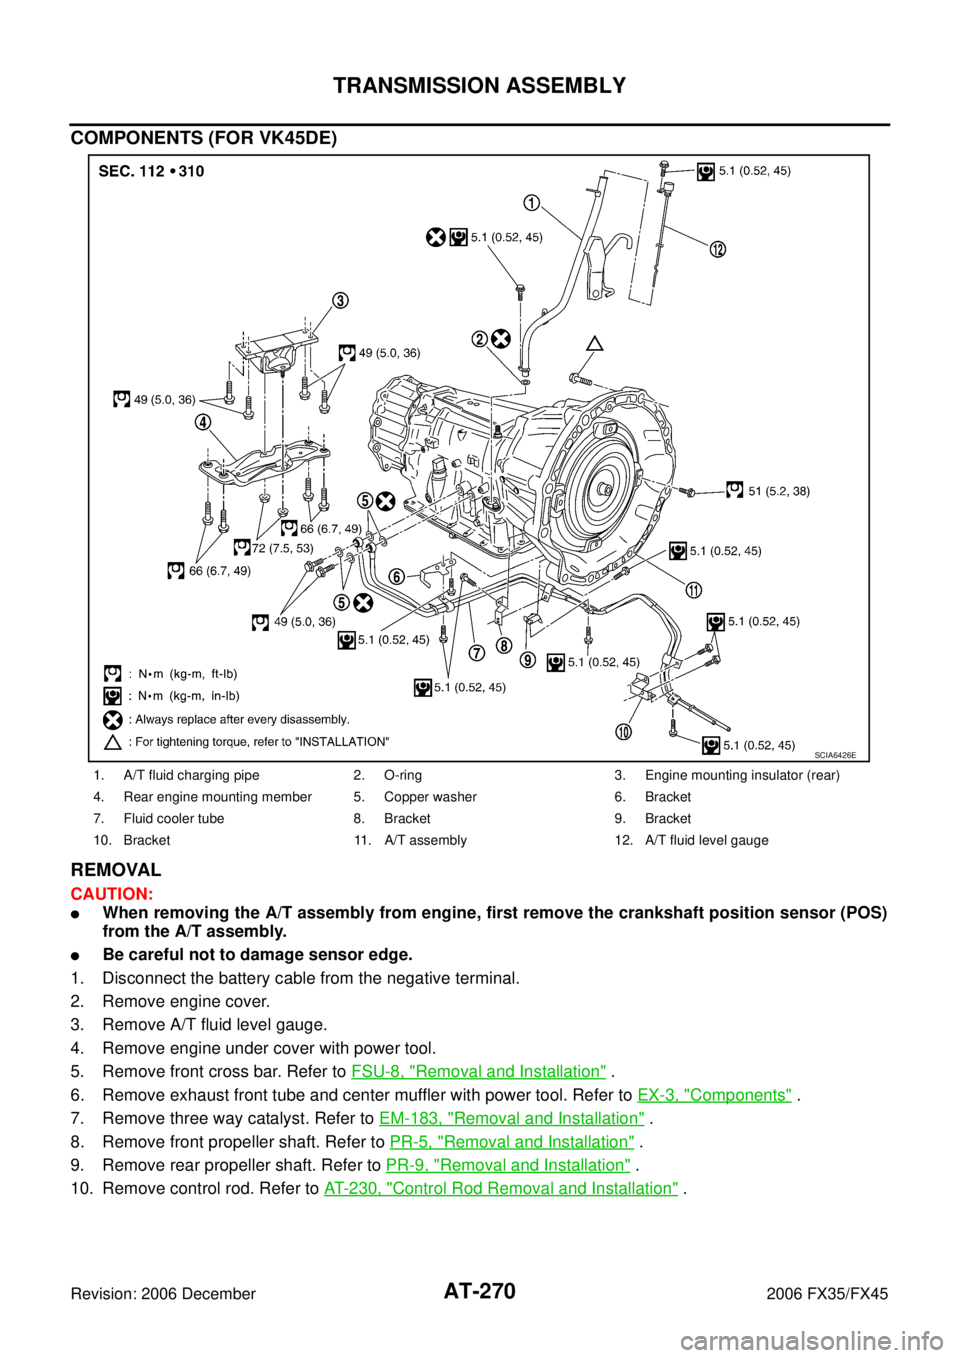 INFINITI FX35 2006  Service Manual AT-270
TRANSMISSION ASSEMBLY
Revision: 2006 December 2006 FX35/FX45
COMPONENTS (FOR VK45DE) 
REMOVAL
CAUTION:
When removing the A/T assembly from engine, first remove the crankshaft position sensor (